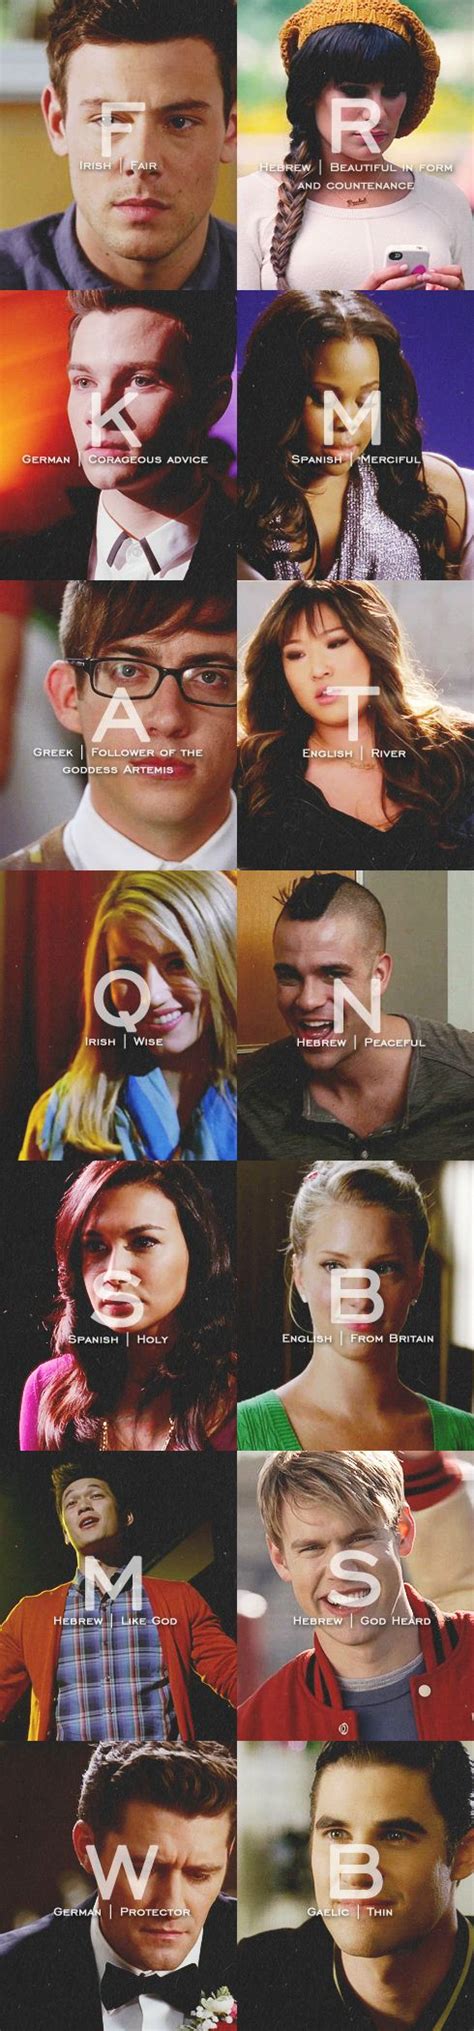 Glee Characters The Origin And Meaning Of Their Name Glee In 2019